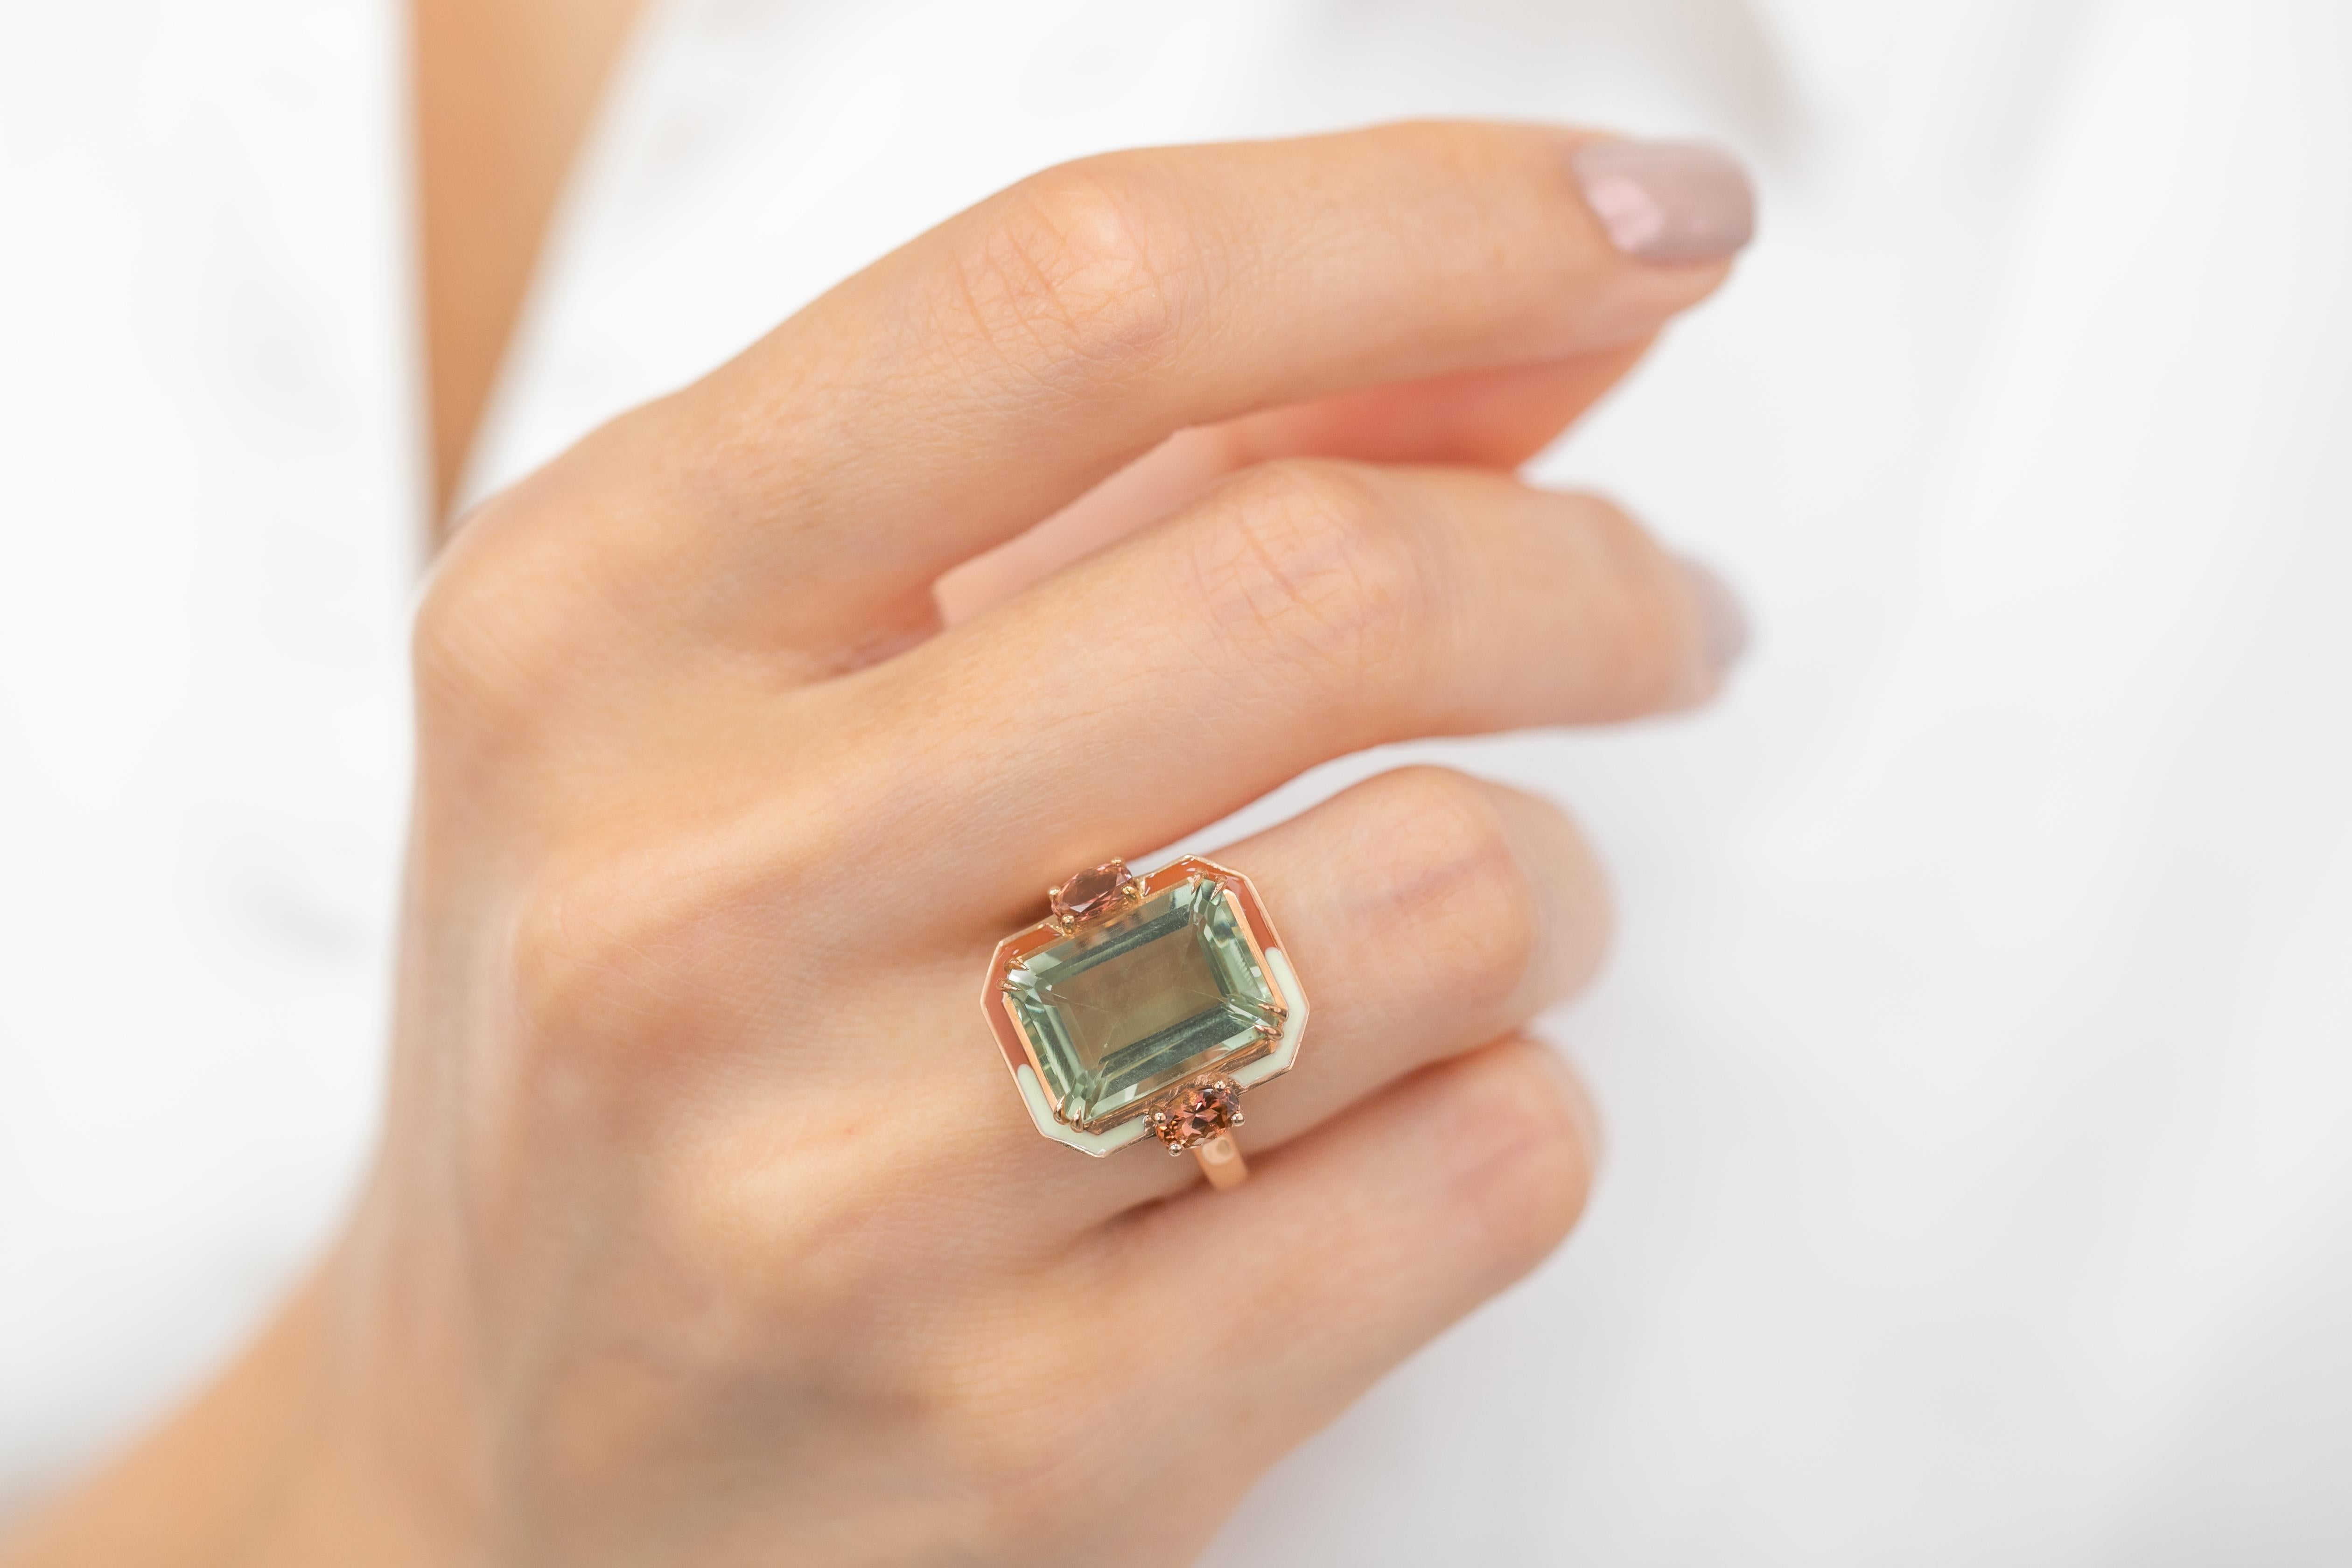 For Sale:  Artdeco Style Ring, 14k Solid Gold, Green Amethyst and Pink Tourmaline Stone Ring 12